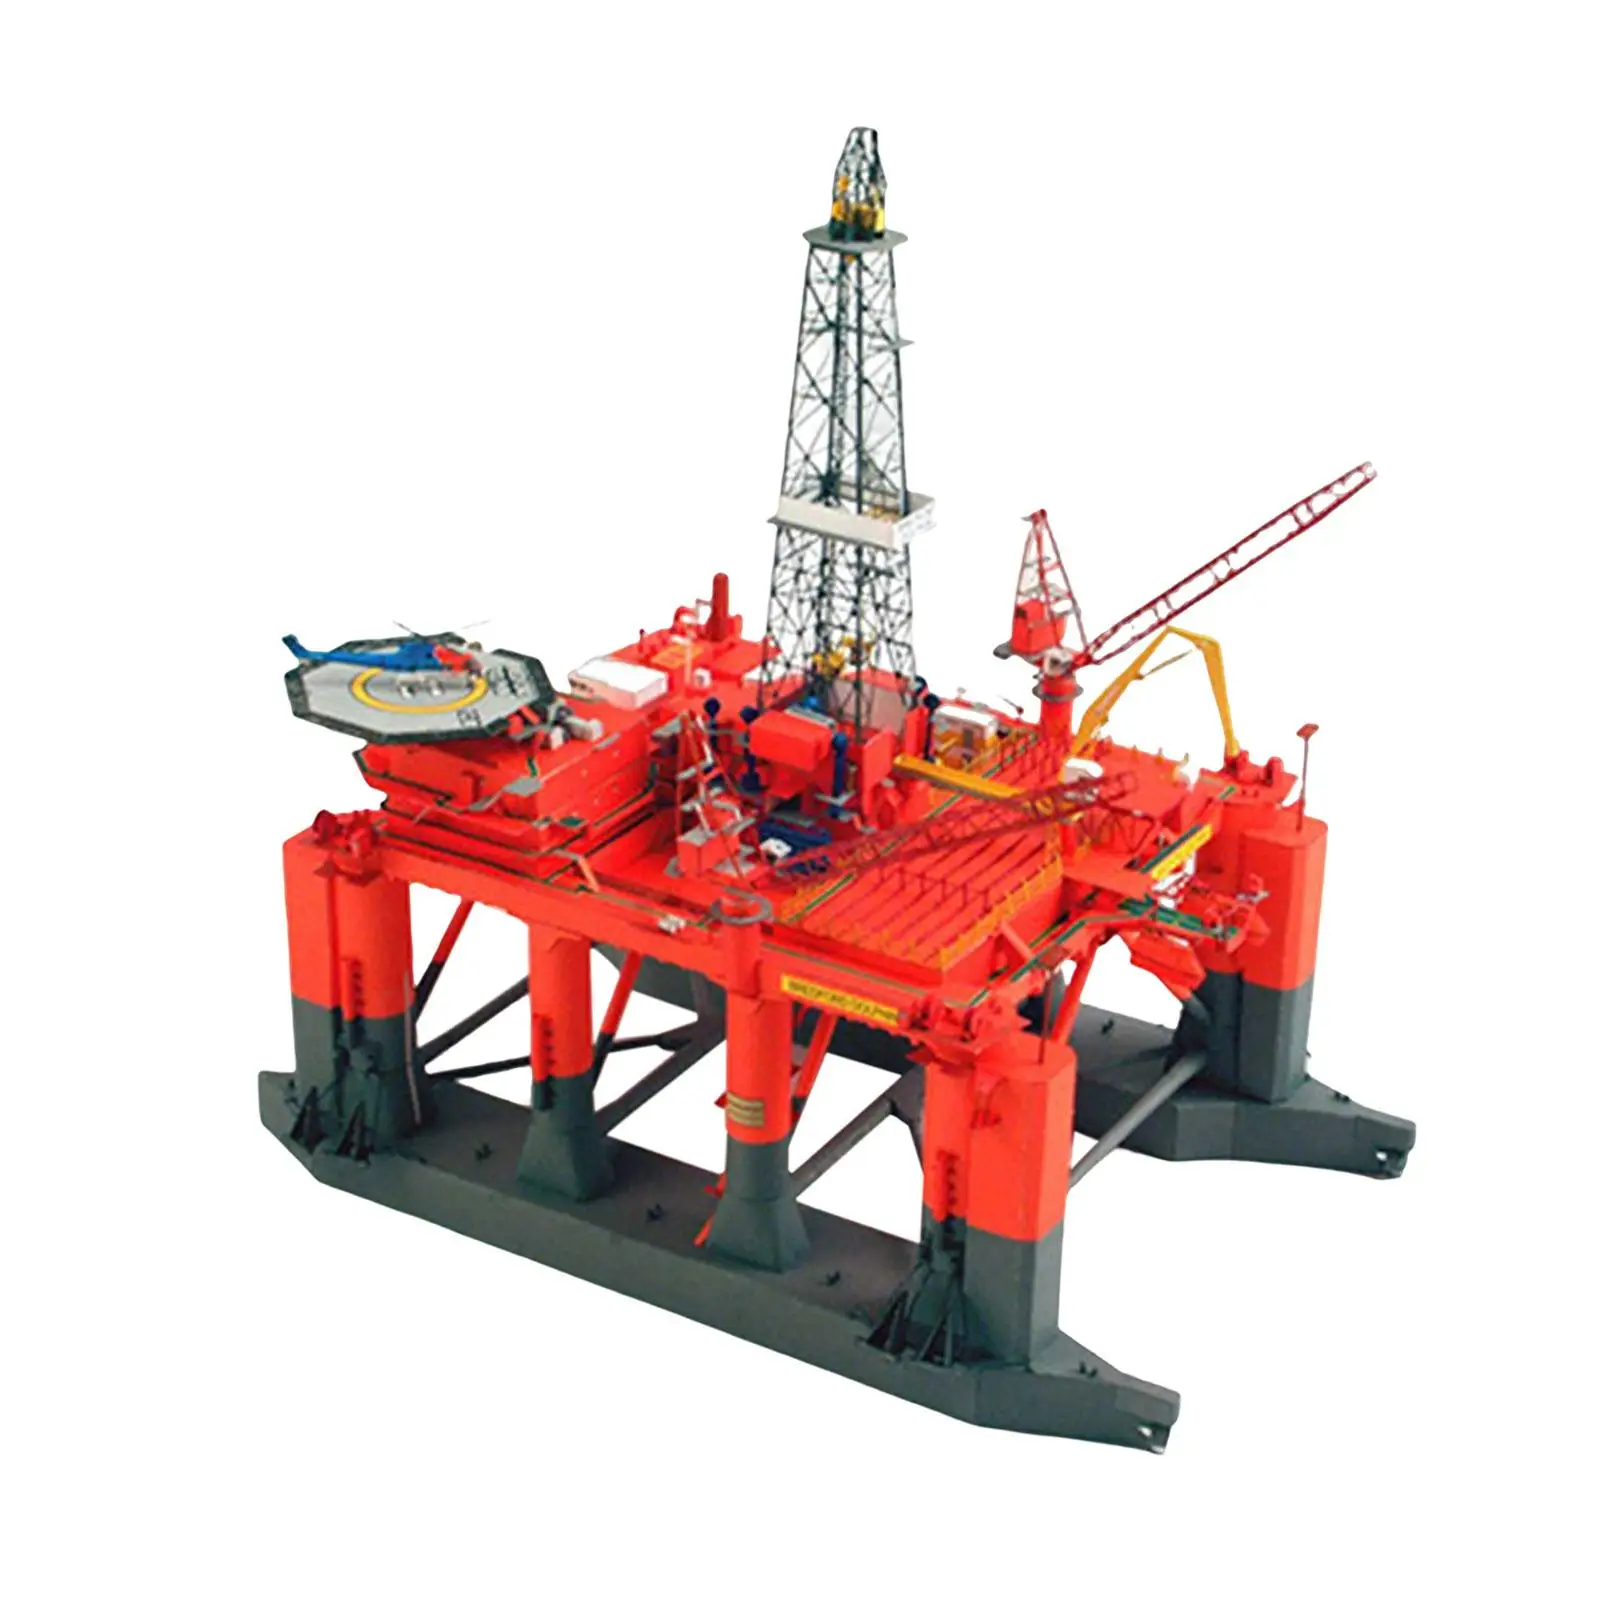 3D 1/400 Semi Submersible Oil Rig Paper Crafts DIY Kit Accessories Included Finished Size 27x16.8cm Durable Sturdy Ornaments